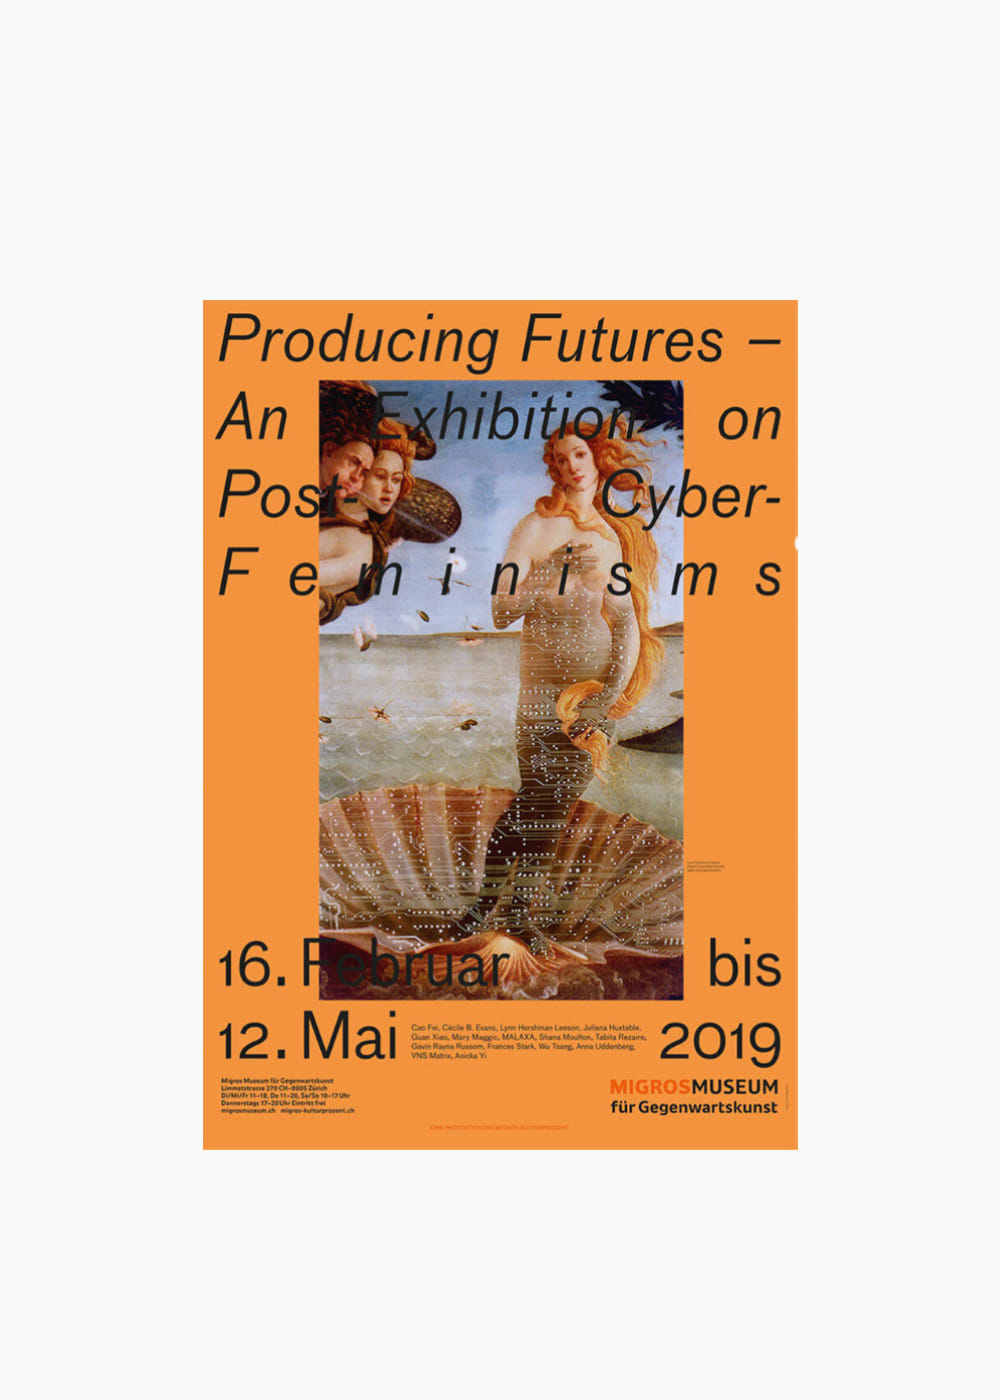 PLAKAT PRODUCING FUTURES – AN EXHIBITION ON POST-CYBER-FEMINISMS (90x128cm)